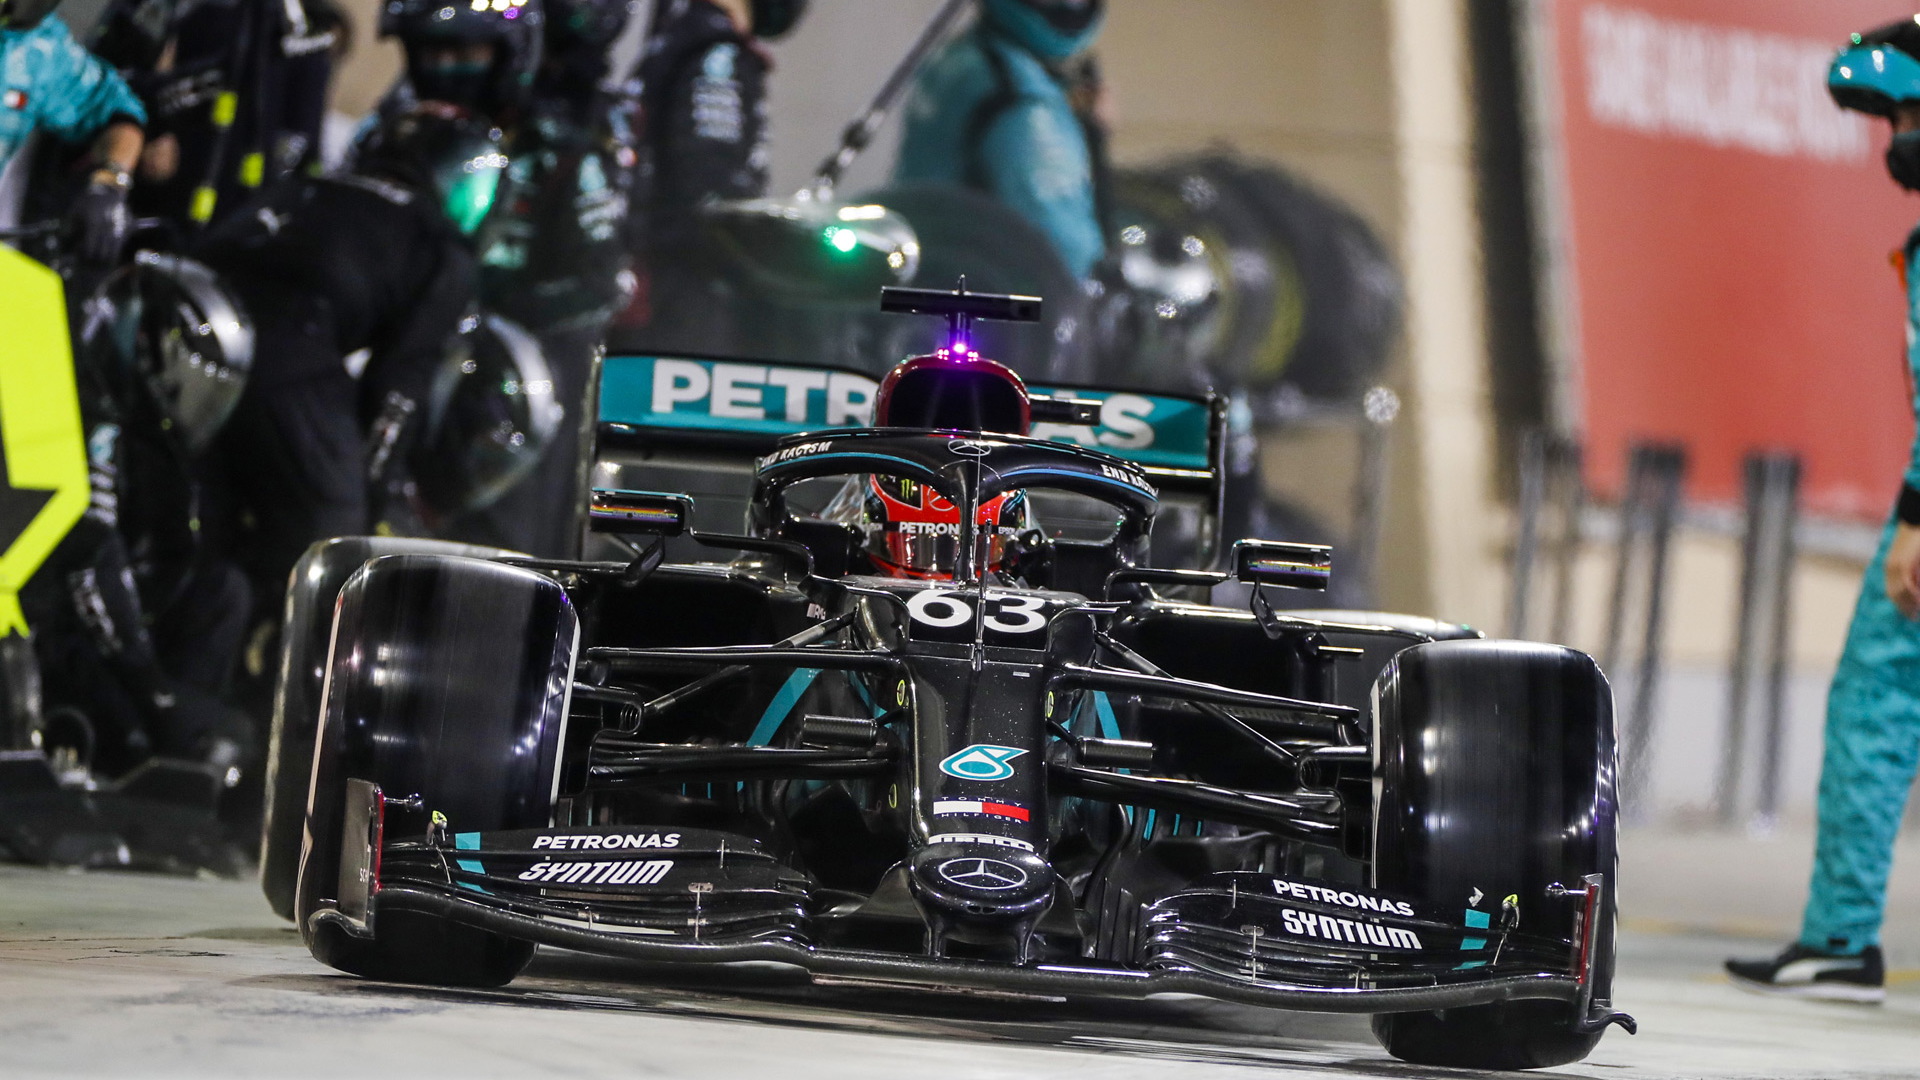 Mercedes-Benz AMG's George Russell at the 2020 Formula One Sakhir Grand Prix